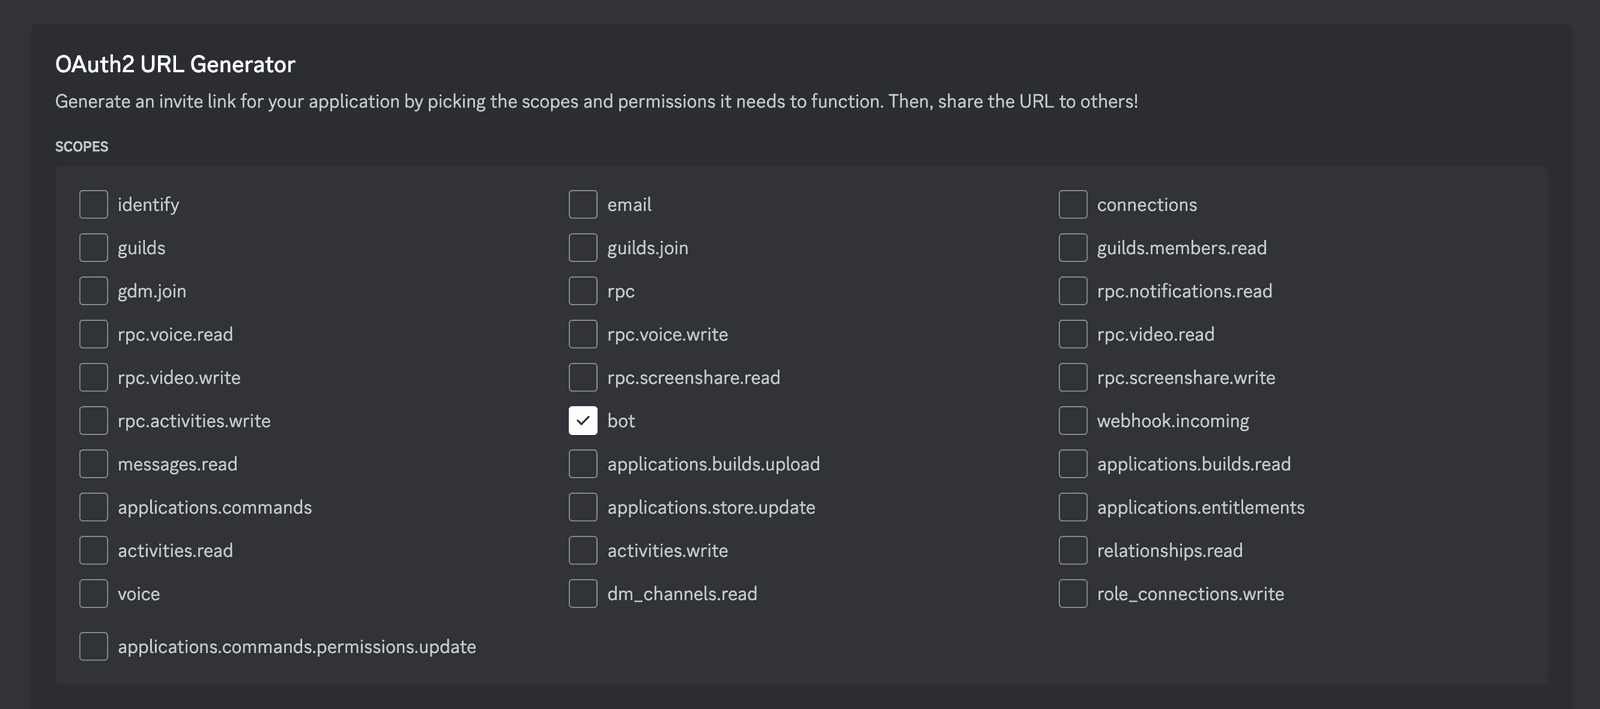 Choose the type of discord application in OAuth2